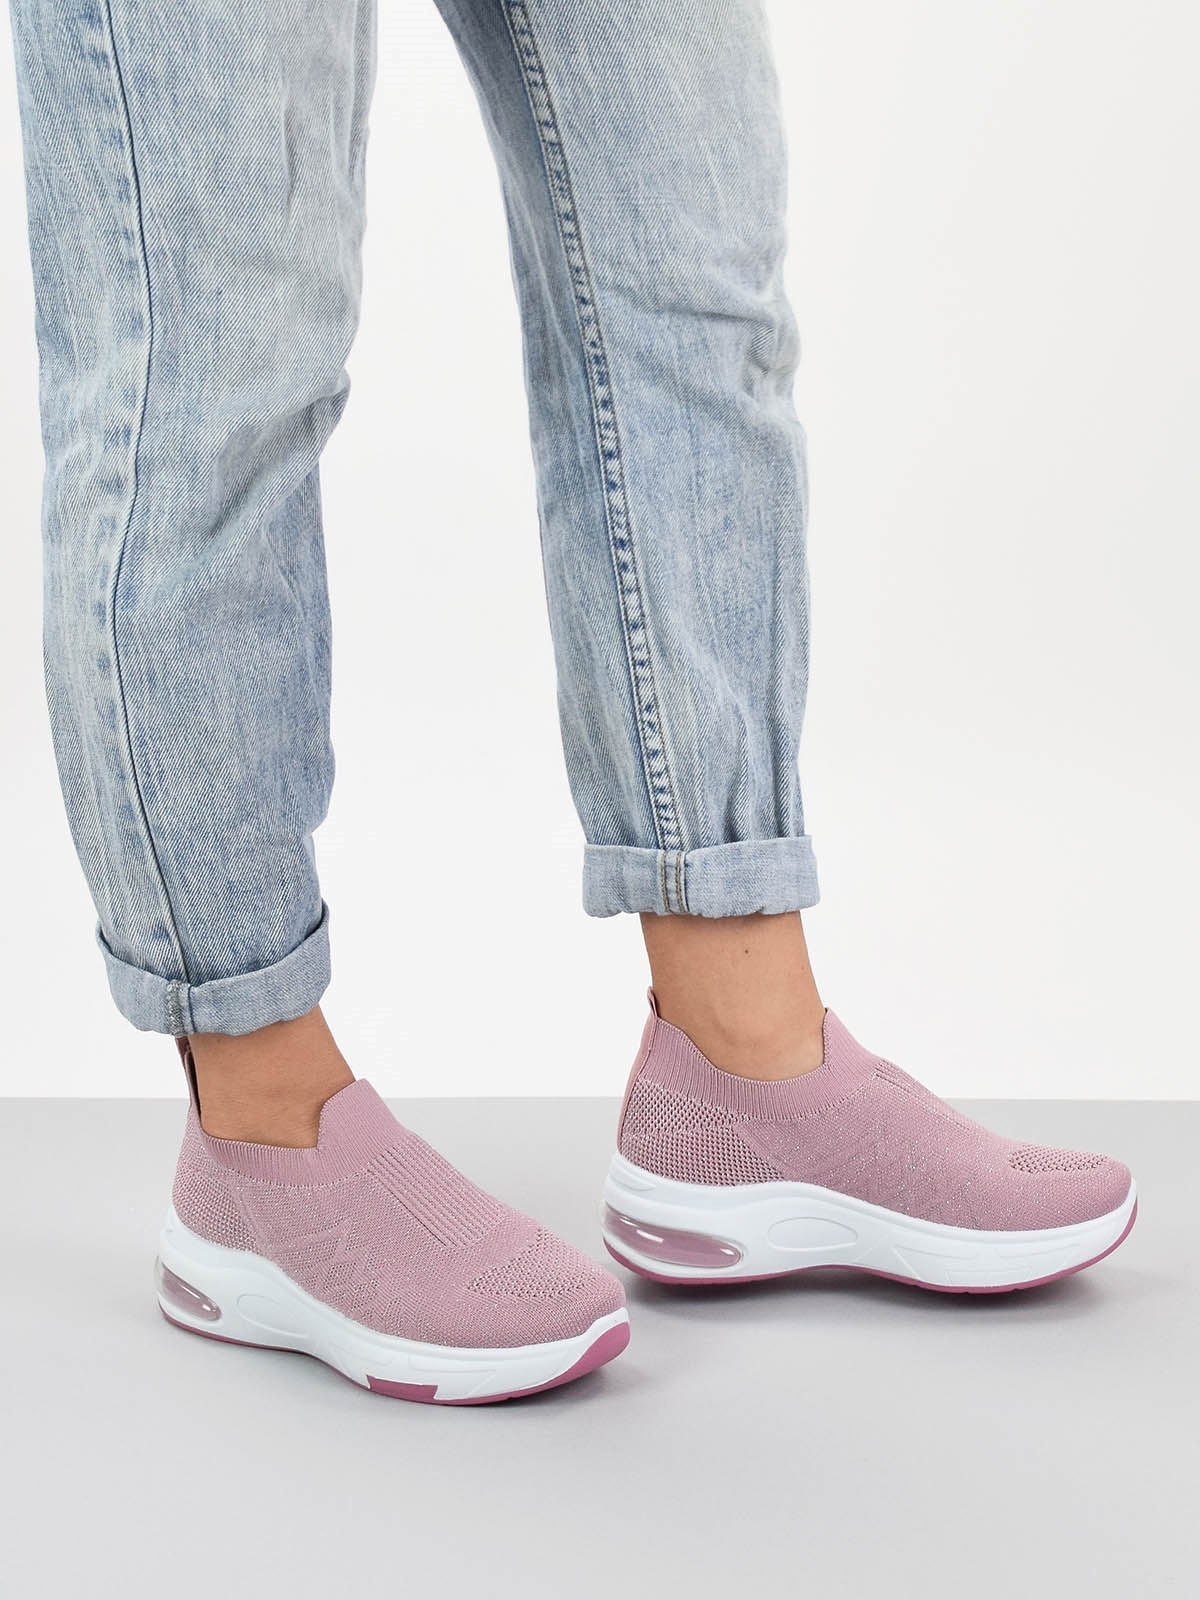 Sock style trainers with white sole in pink